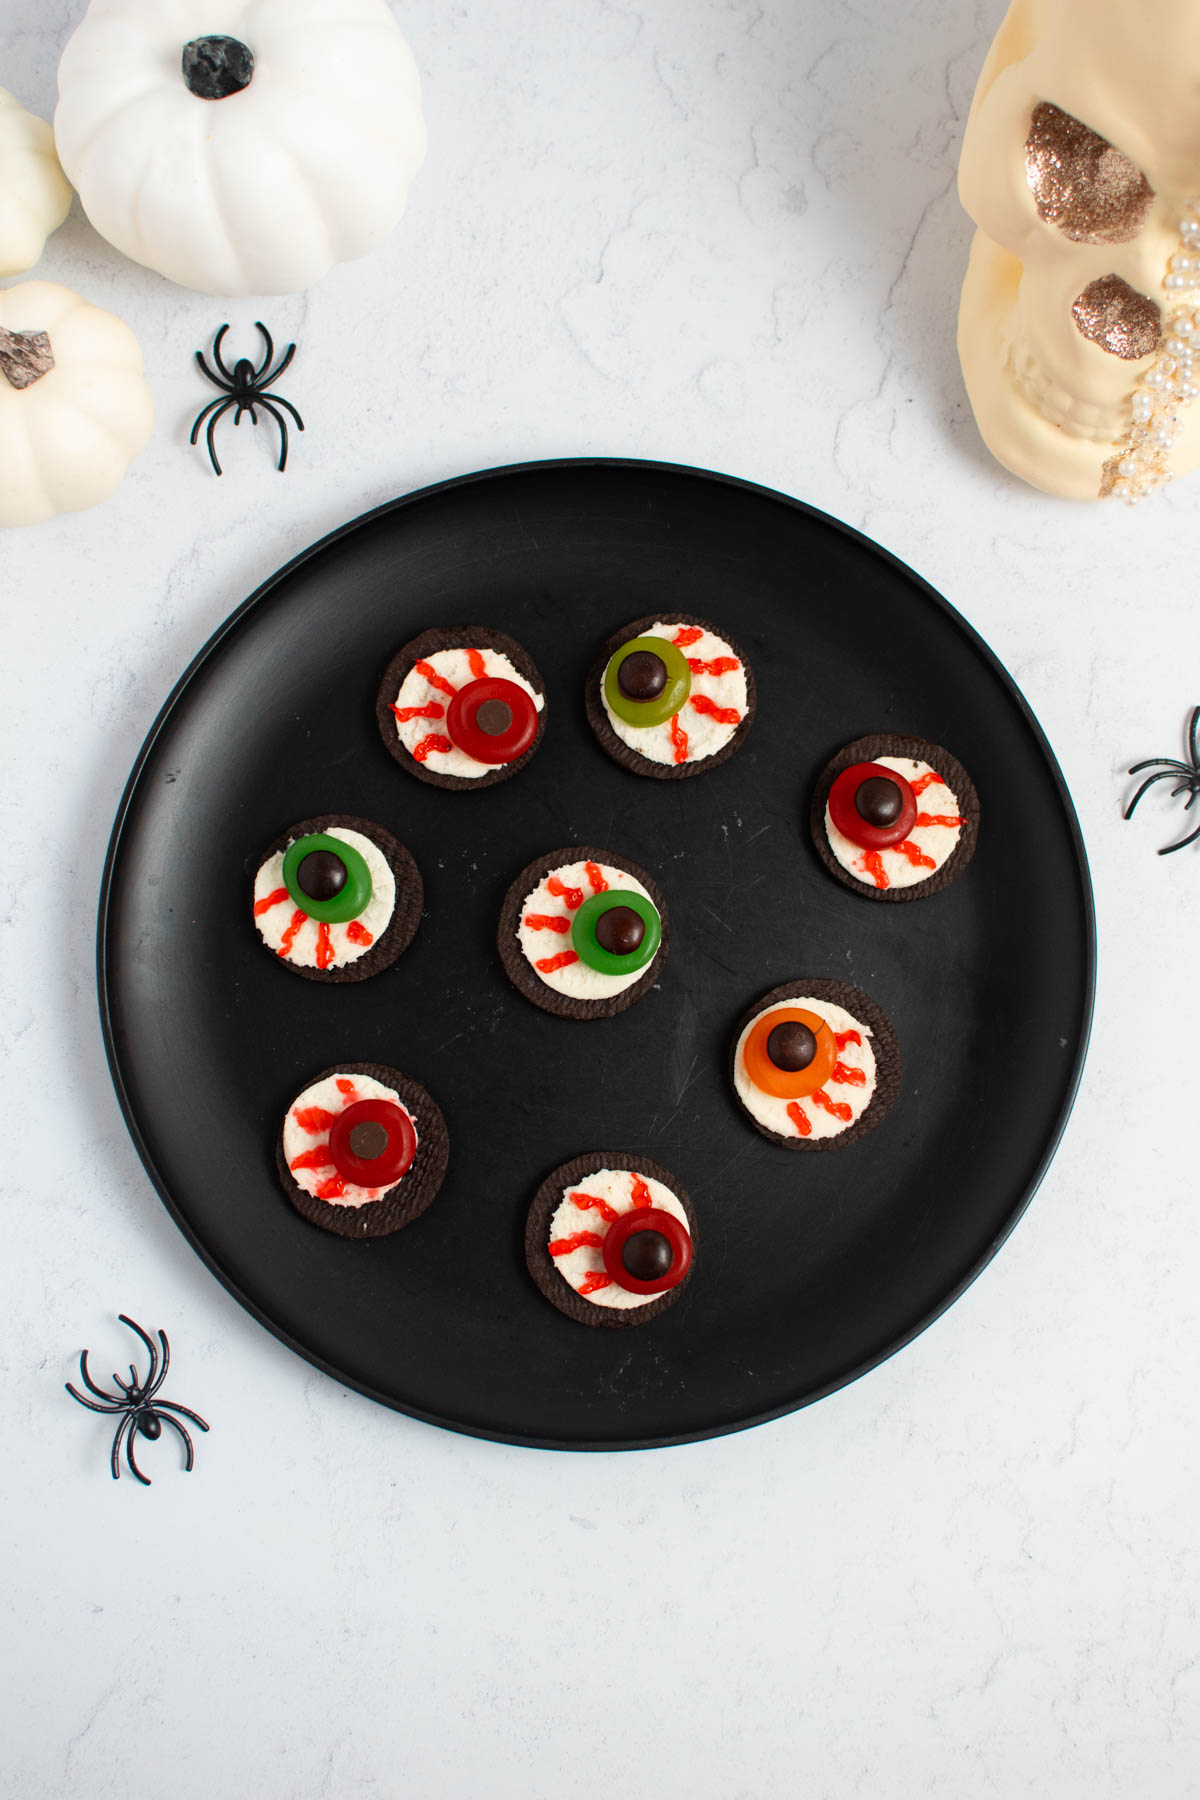 Oreo eyeball cookies on black plate surrounded by plastic spiders, pumpkins, and skull head.